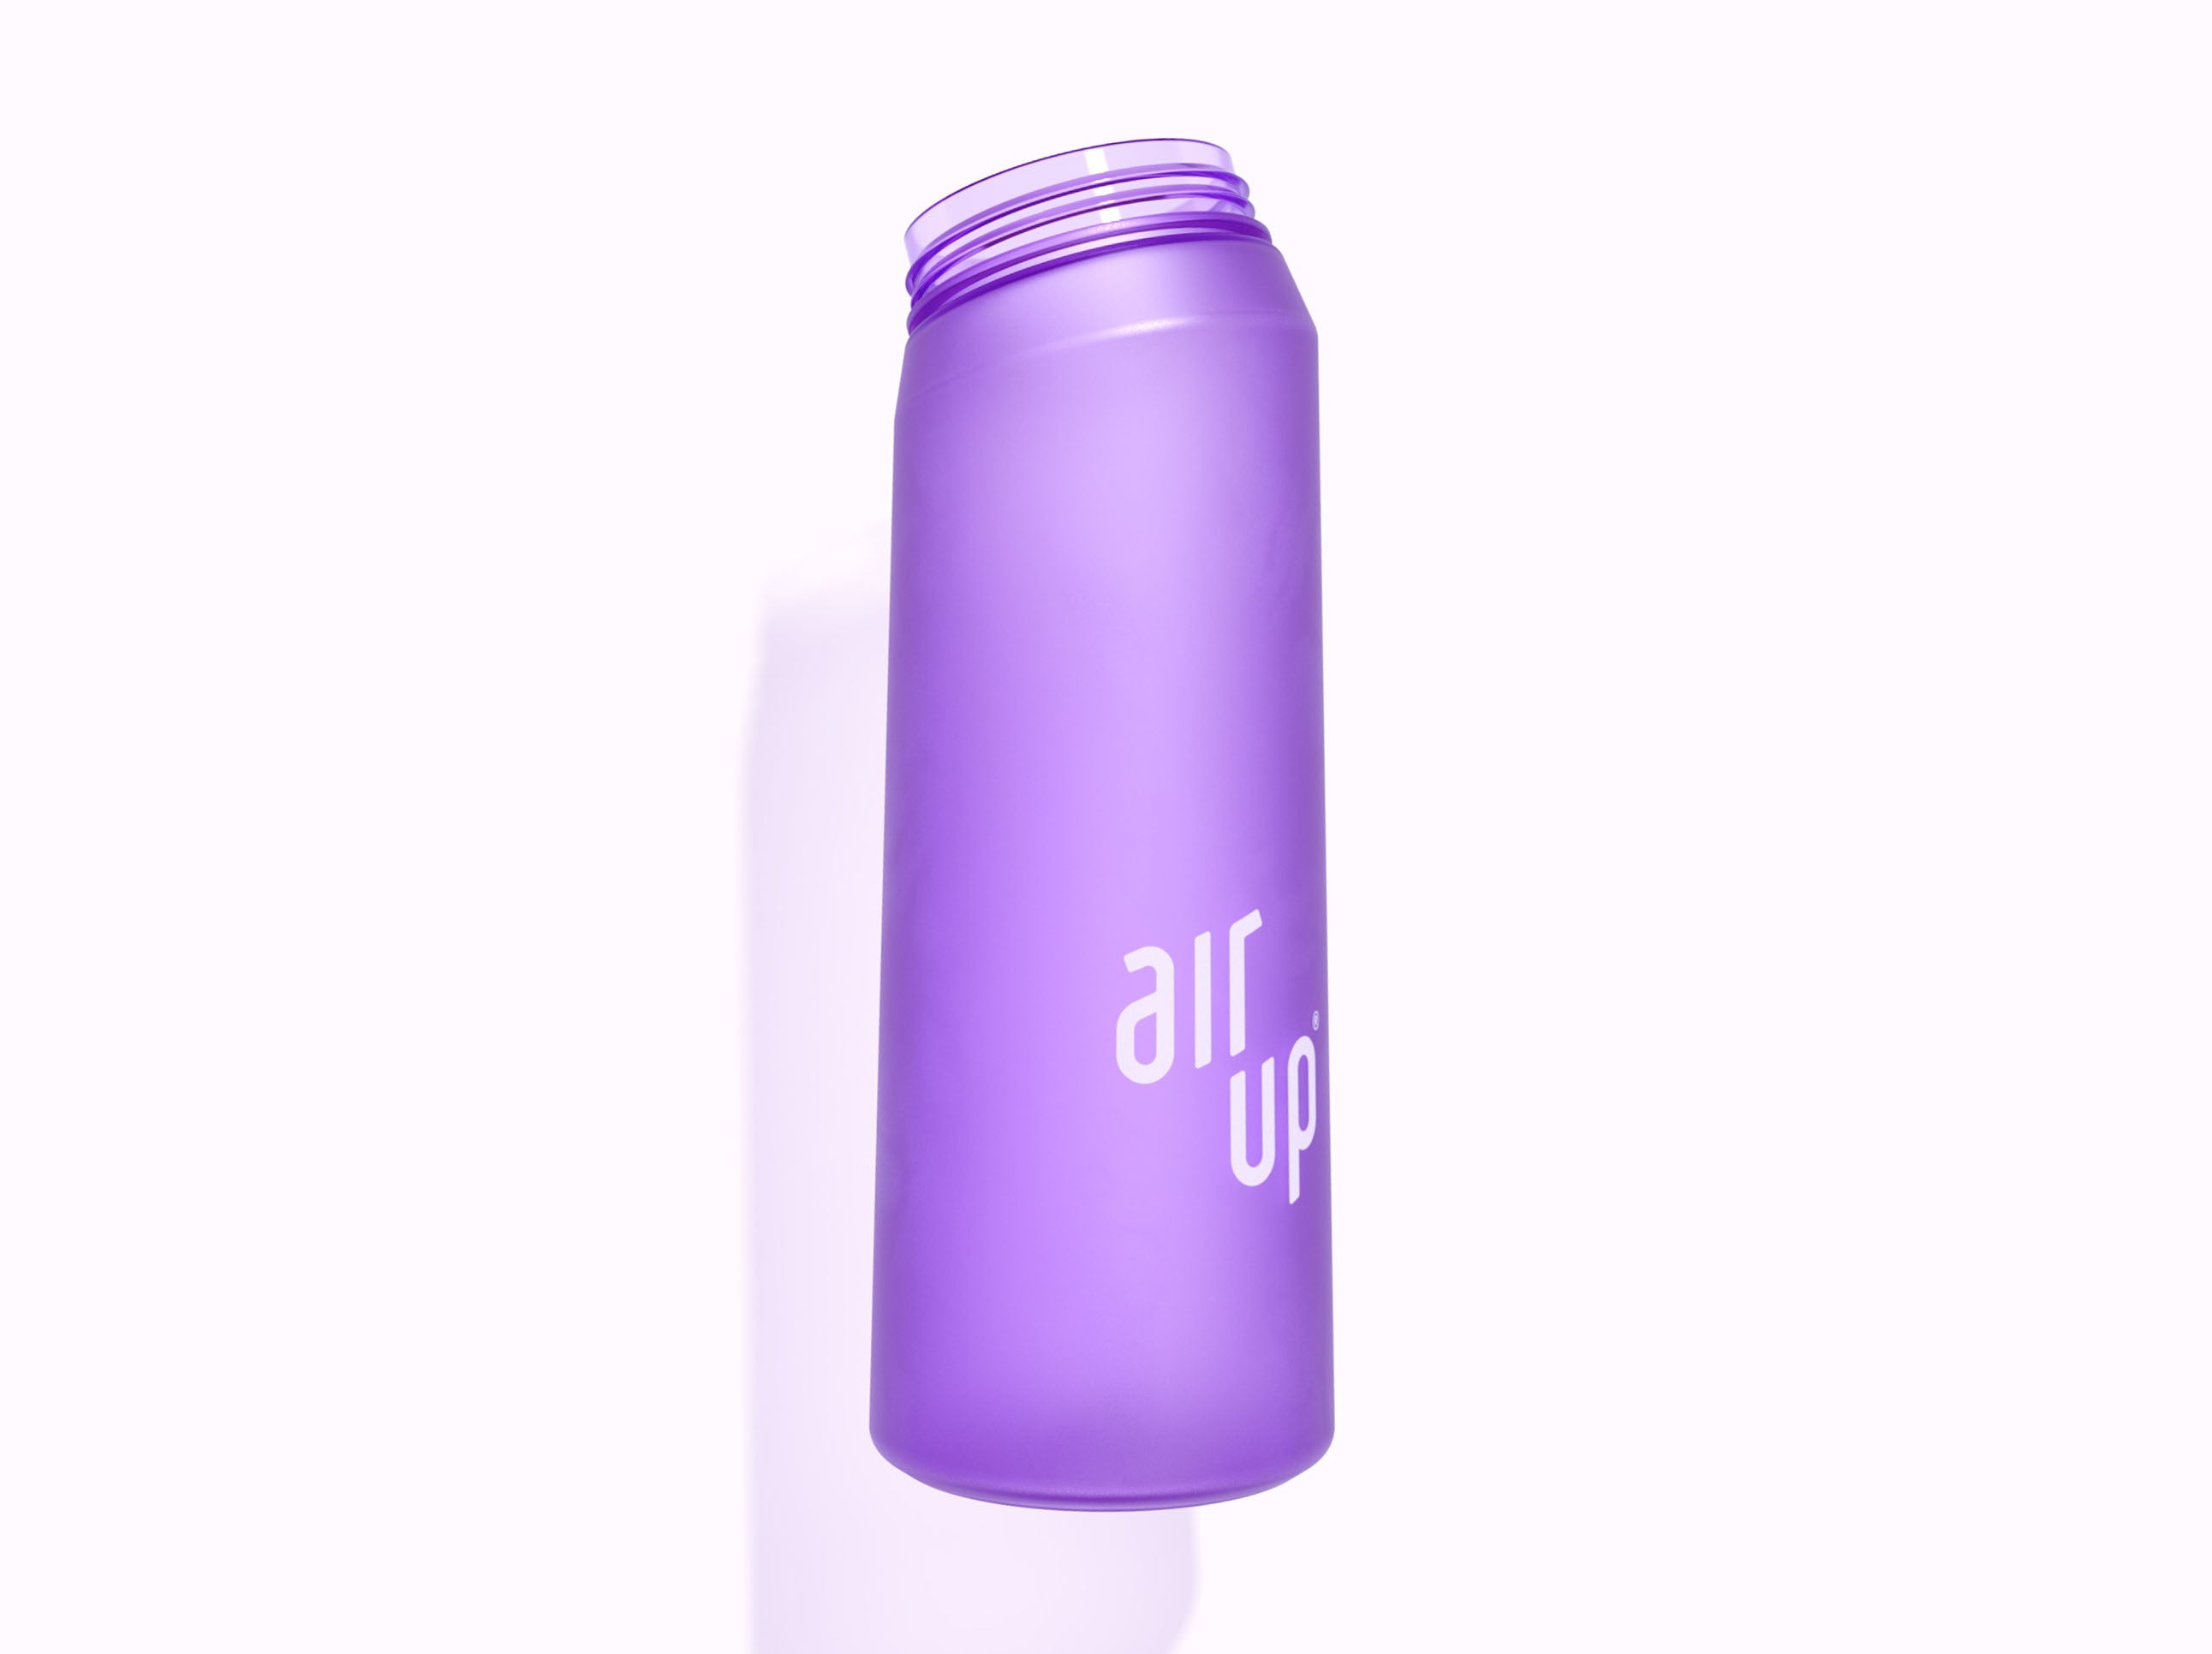  AIEVE Pod Case for Air Up Water Bottle, Storage Case  Accessories Compatible with Air Up Bottle Pods Starter Set (Air Up Water  Bottle and Flavor Not Included, Only Pod Case) 